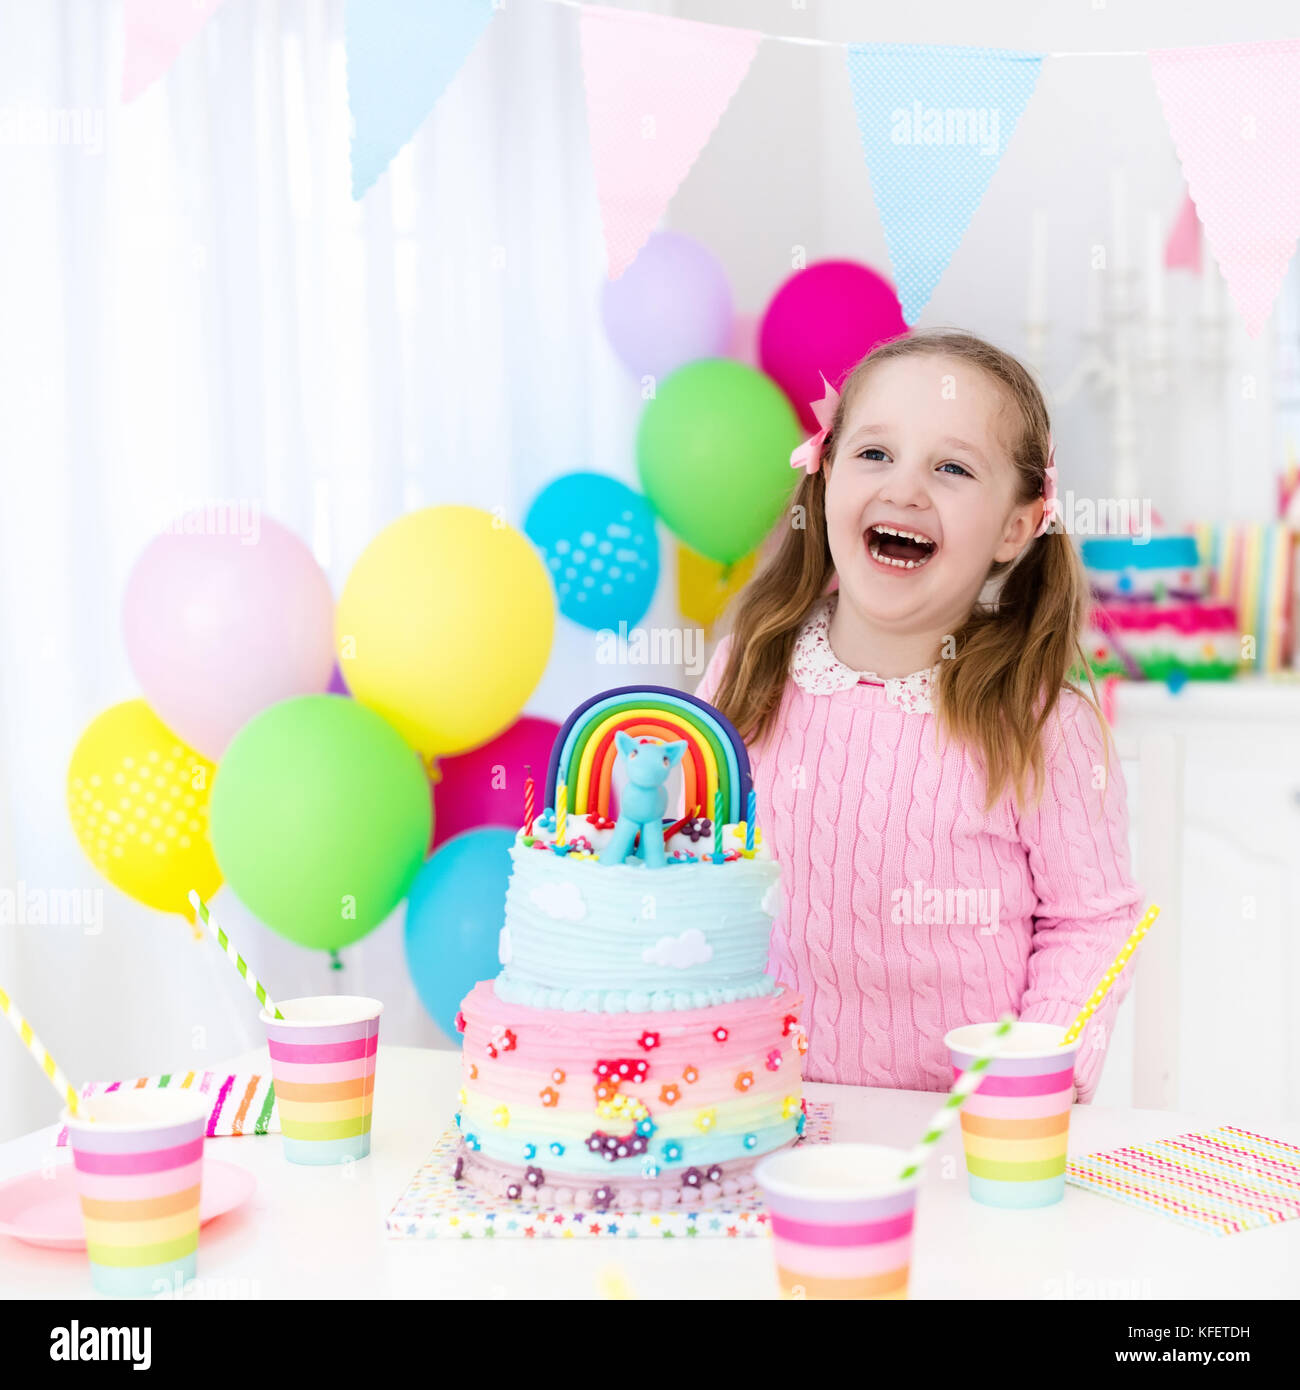 Kids birthday party with colorful pastel decoration and unicorn rainbow cake. Little girl with sweets, candy and fruit. Balloons and banner at festive Stock Photo